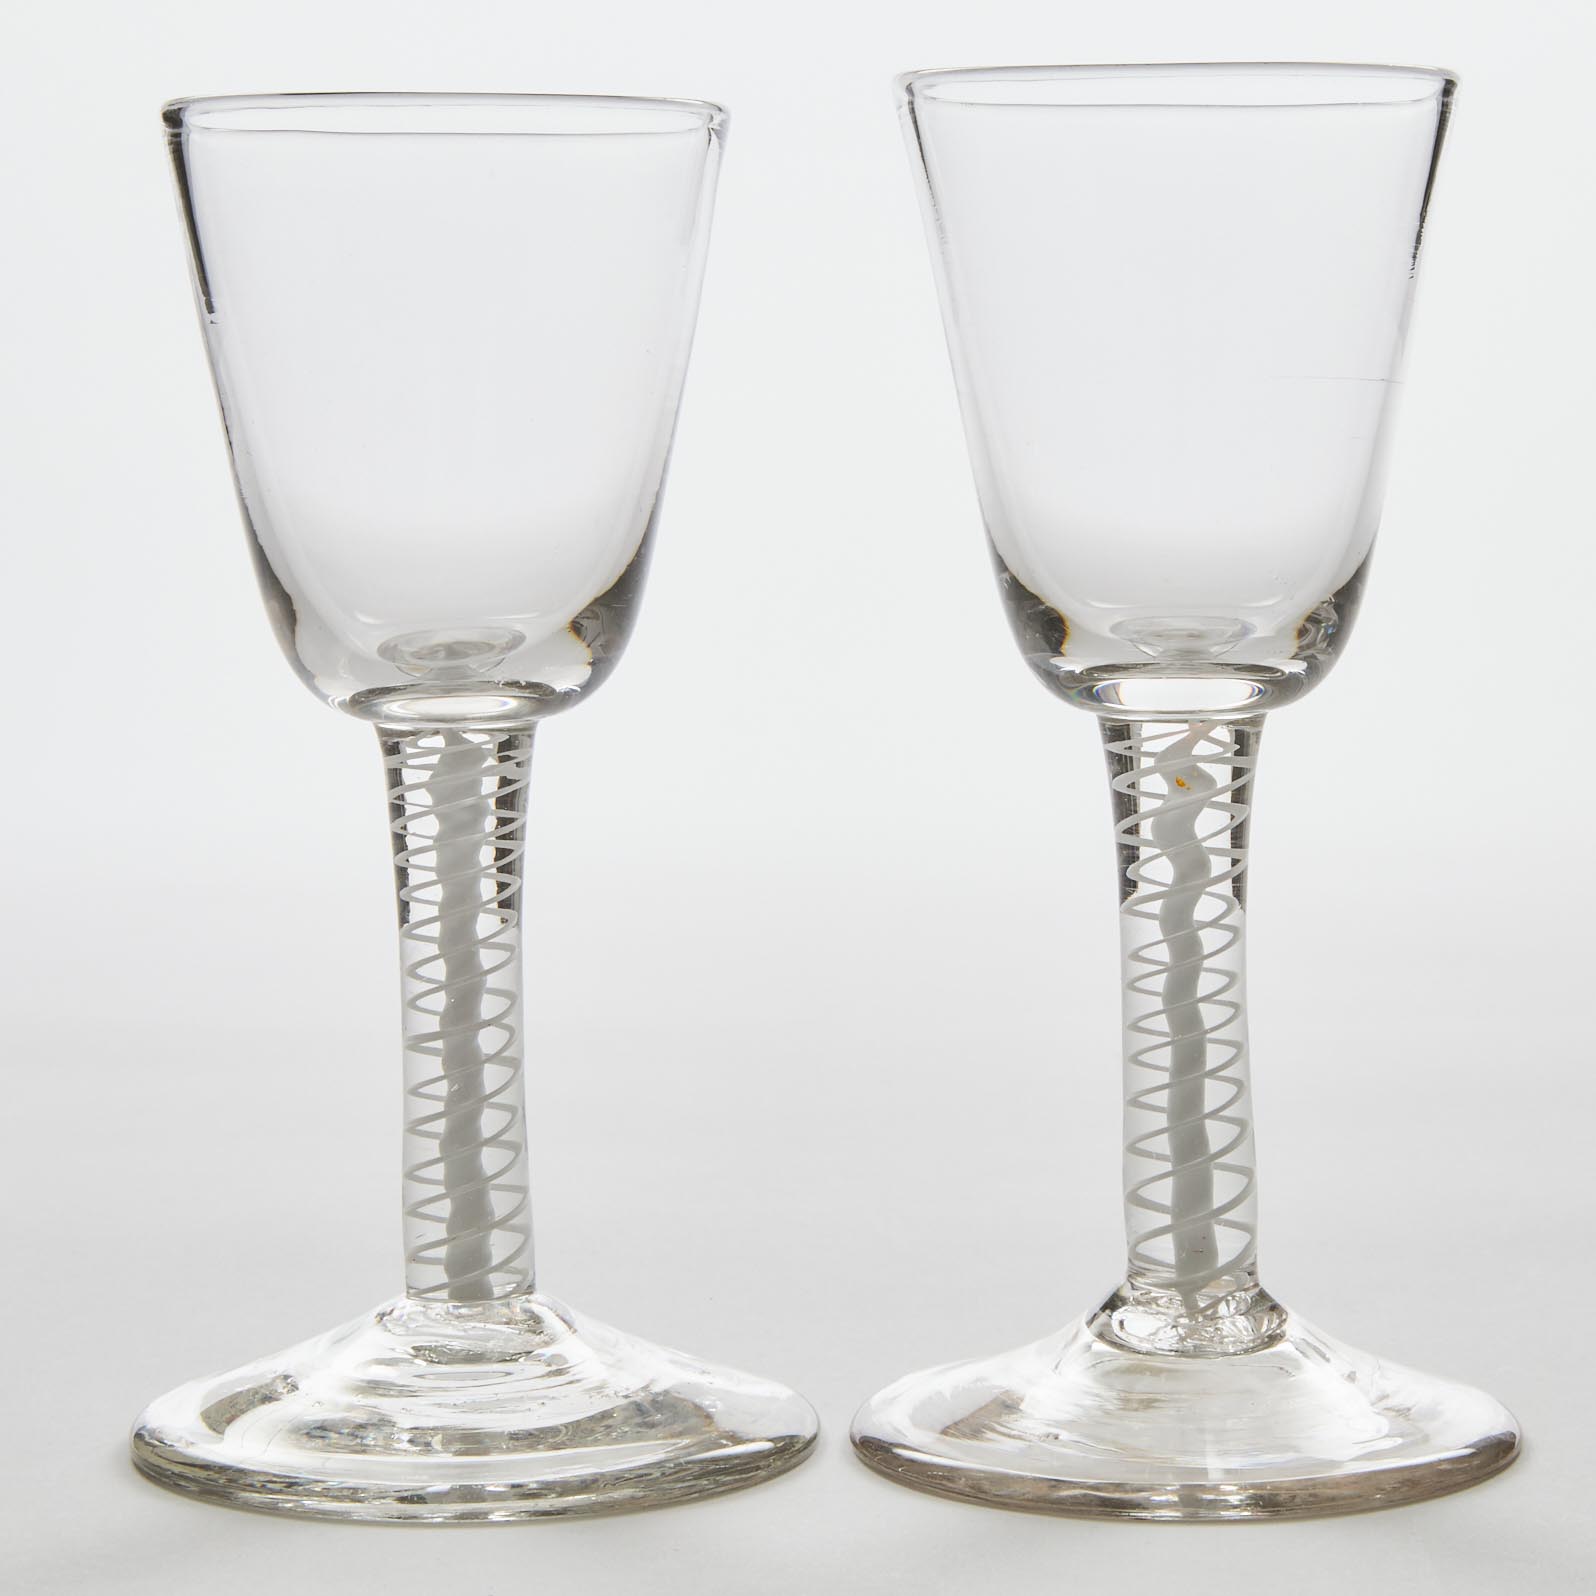 Pair of English Opaque Twist Stemmed Wine Glasses, c.1760-80